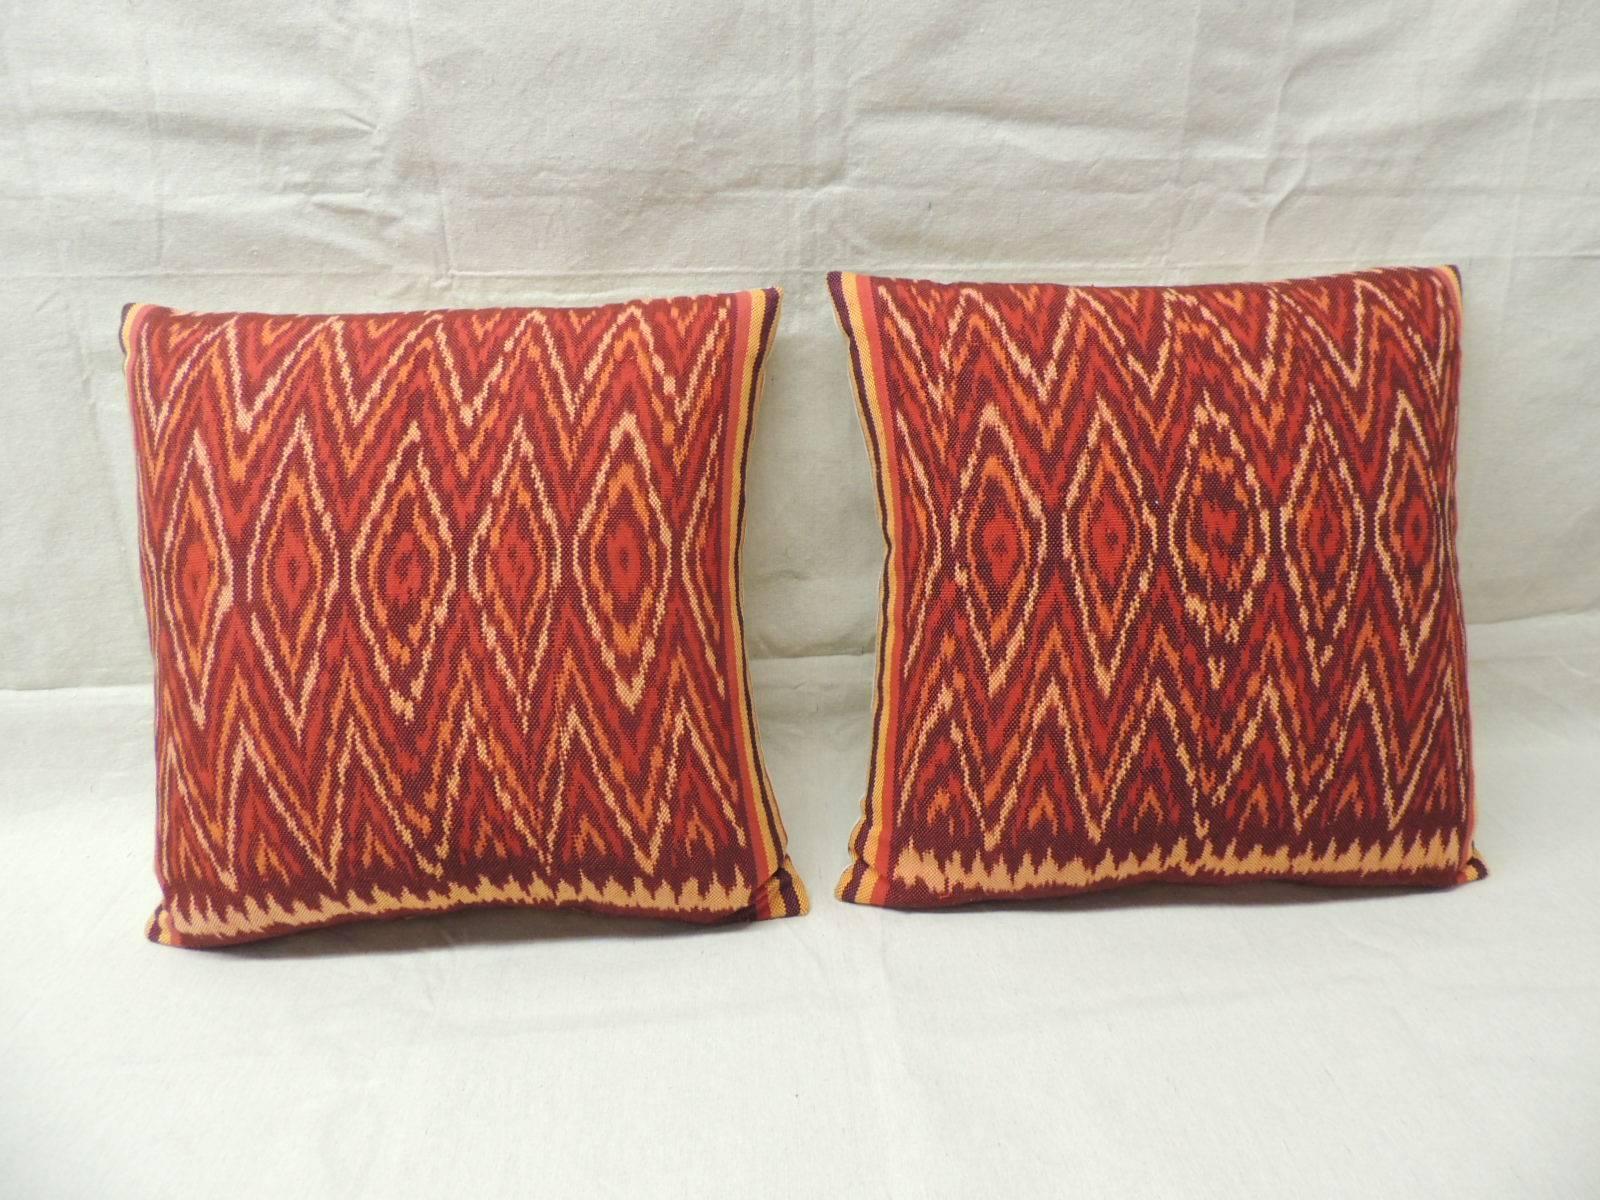 Indonesian Pair of Red and Orange Vintage Ikat Woven Pillows